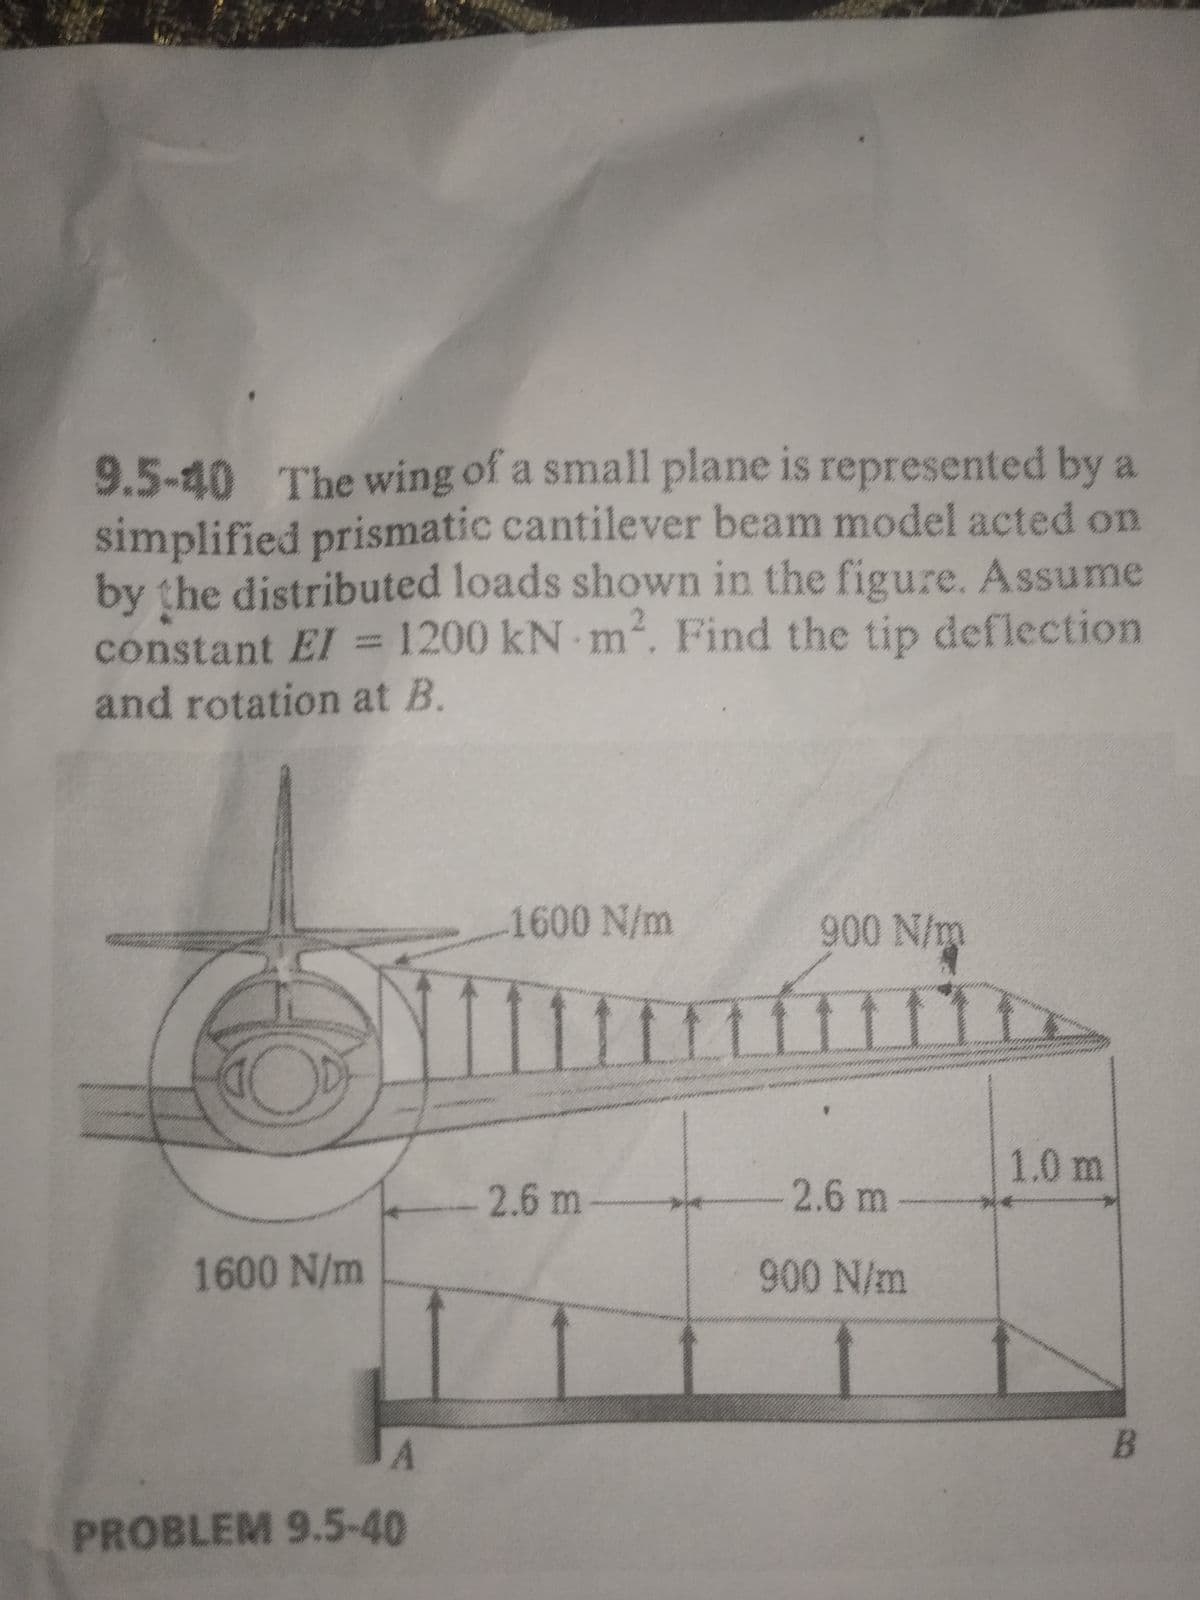 9.5-40 The wing of a small plane is represented by a
simplified prismatic cantilever beam model acted on
by the distributed loads shown in the figure. Assume
constant EI = 1200 kN m, Find the tip deflection
and rotation at B.
1600 N/m
90 N/m
11
1.0 m
2.6 m
2.6 m
1600 N/m
90 N/m
A
PROBLEM 9.5-40
